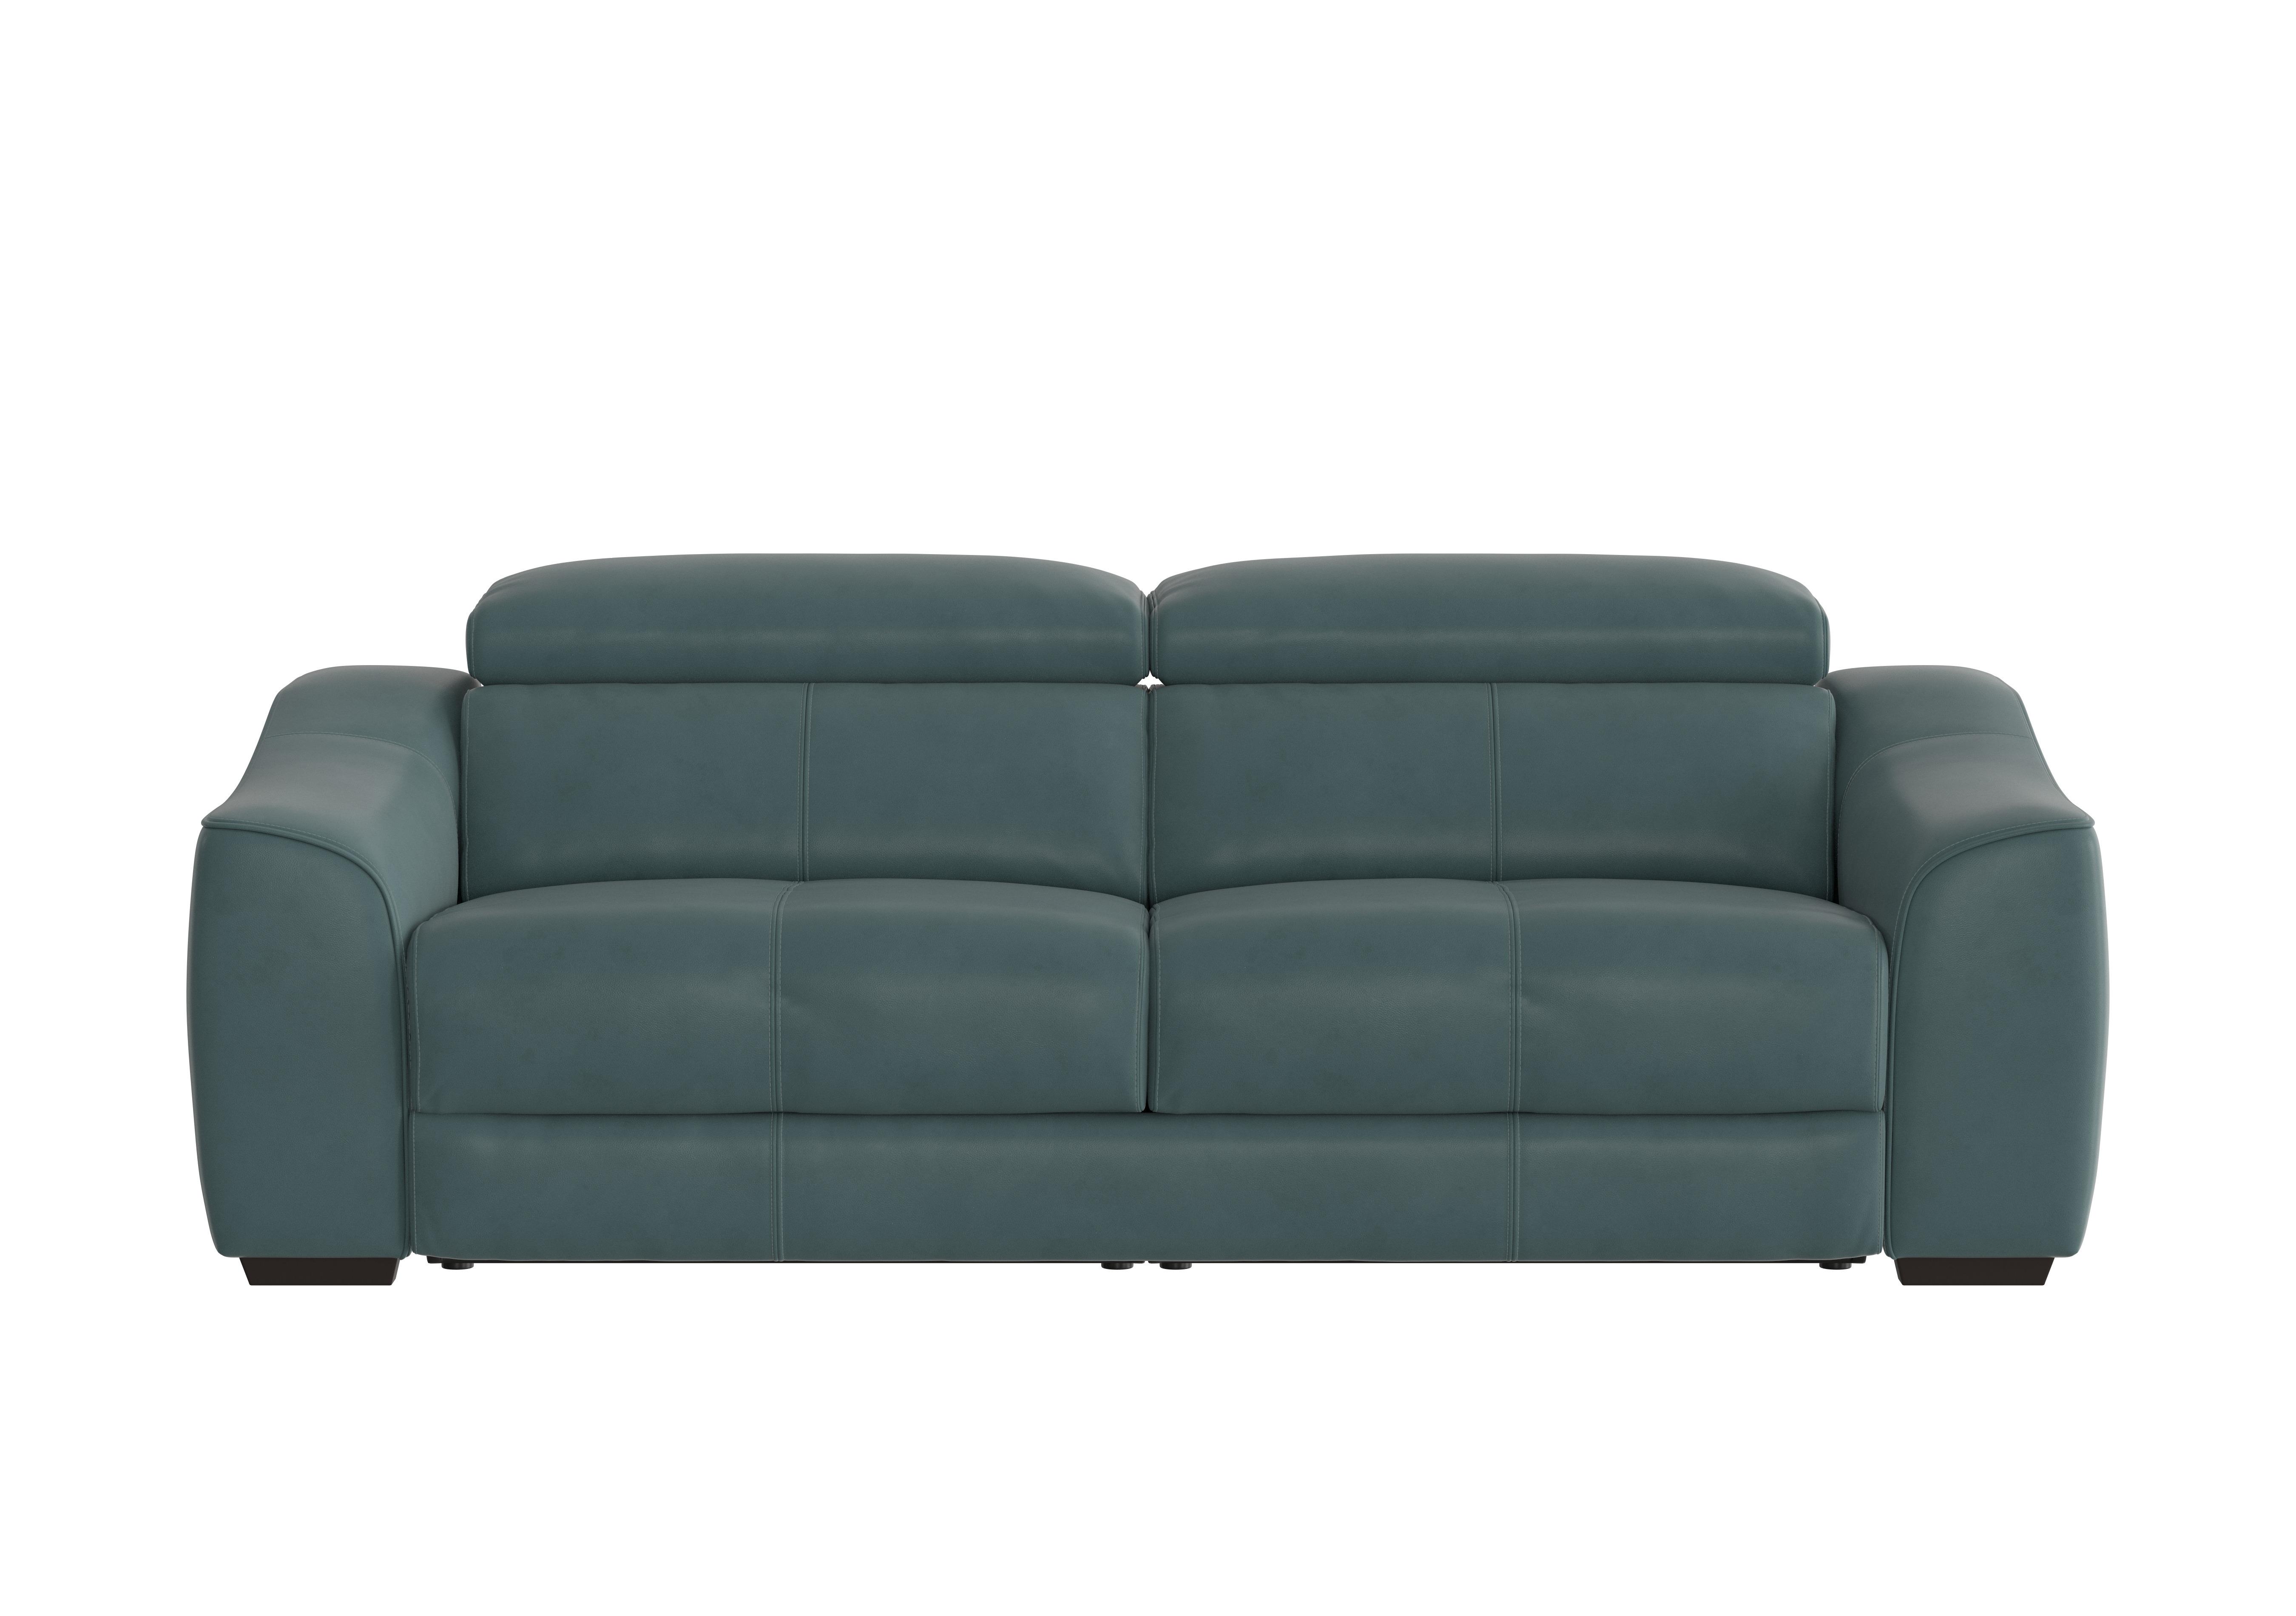 Elixir 3 Seater Leather Sofa Bed in Bv-301e Lake Green on Furniture Village